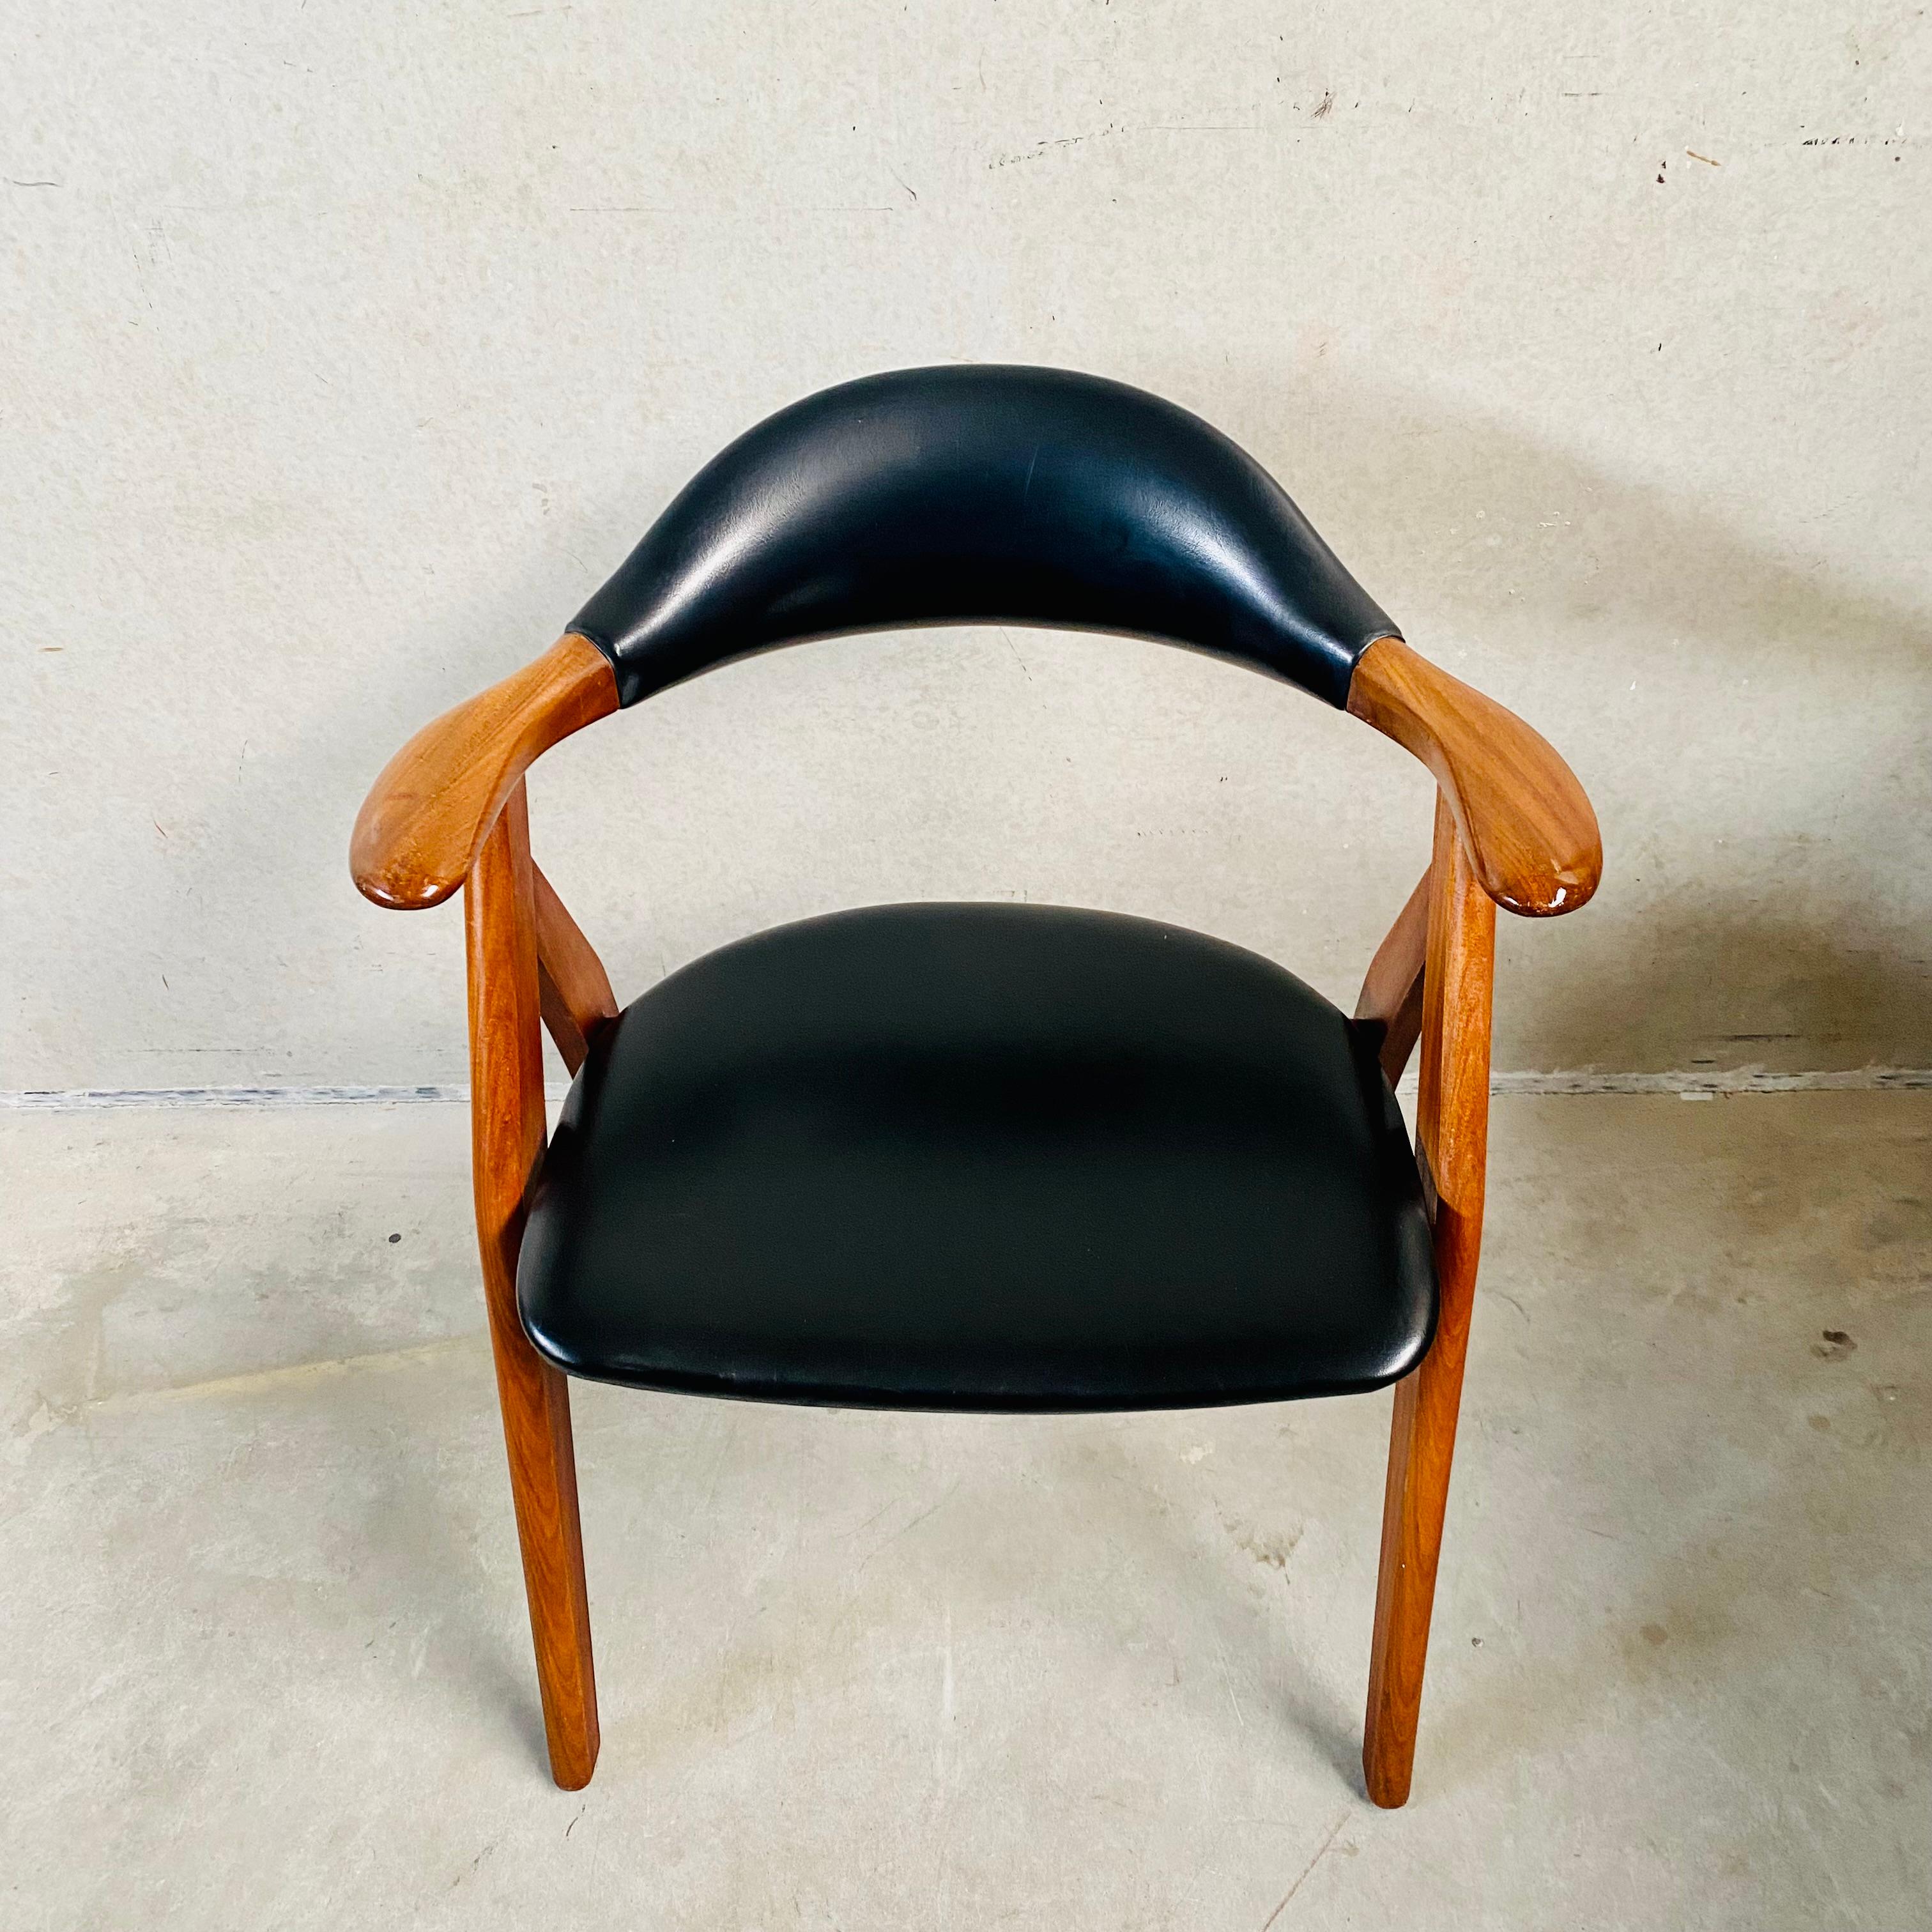 Hand-Crafted Cow Horn Chair by Tijsseling Meubelfabriek, Netherlands 1960 For Sale